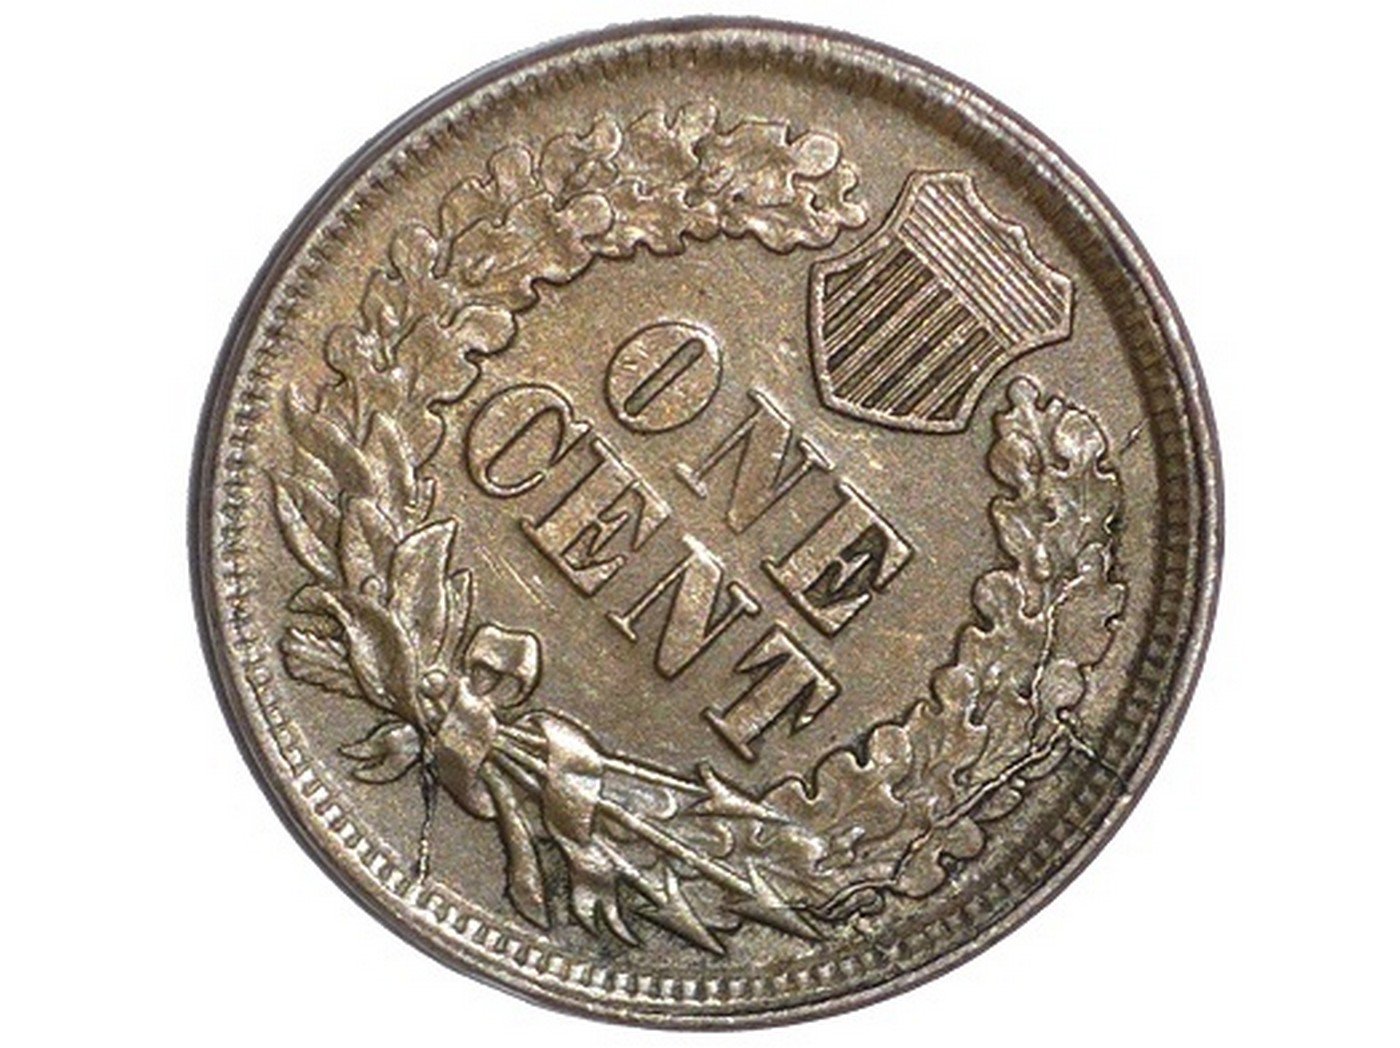 1863 CRK-004 - Indian Head Penny - Photo by David Poliquin